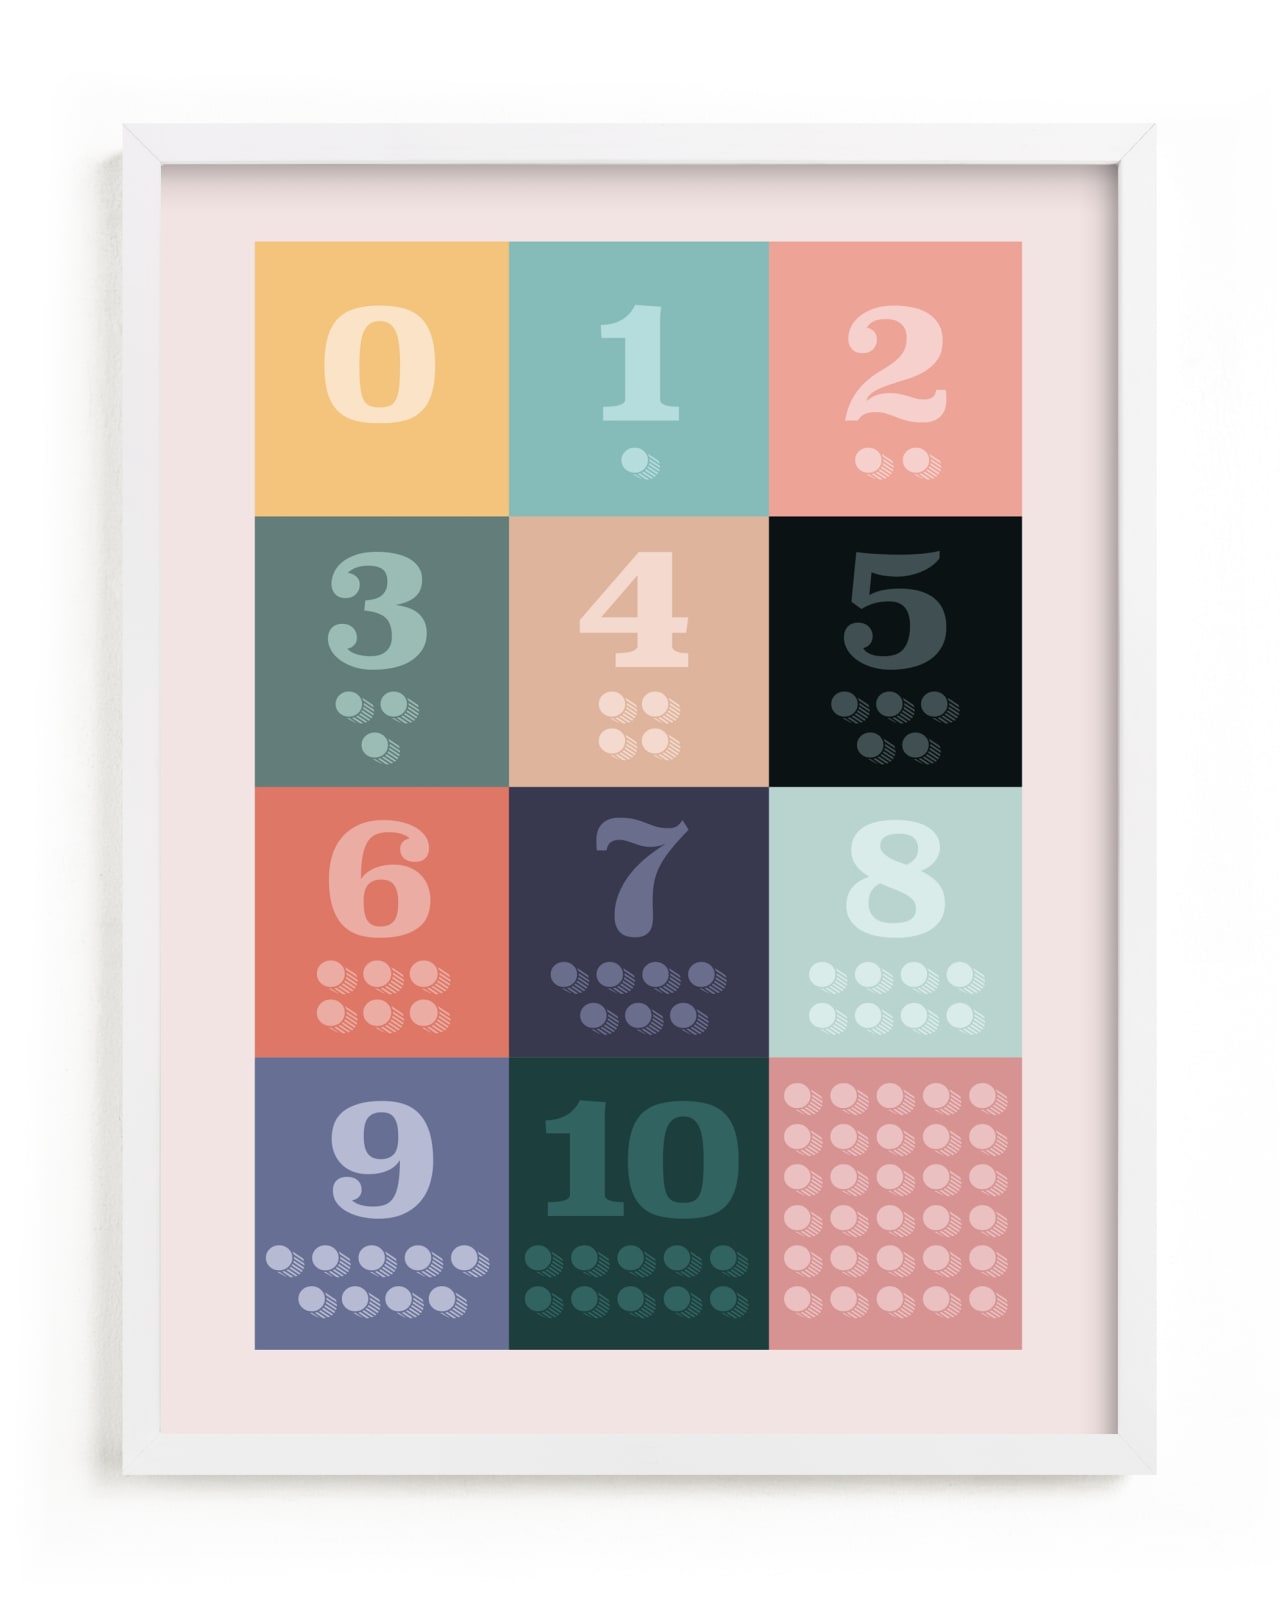 framed print of numbers 1-10, along with the corresponding number of dots accompanying each numeral